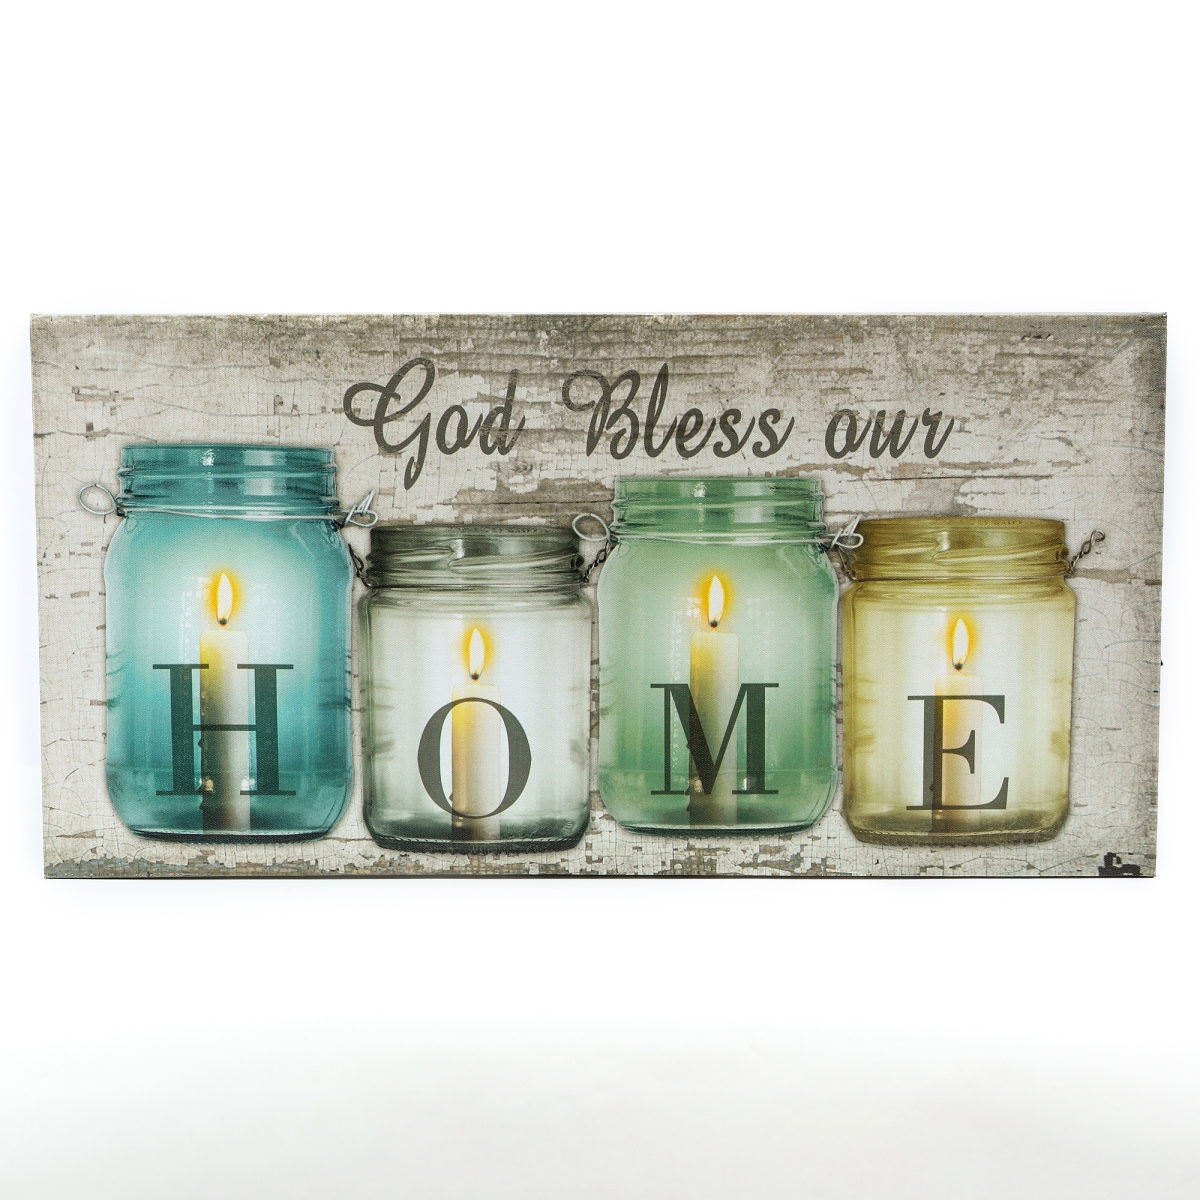 Wha659 God Bless Our Home Canvas Print Wall Art With Led Lights